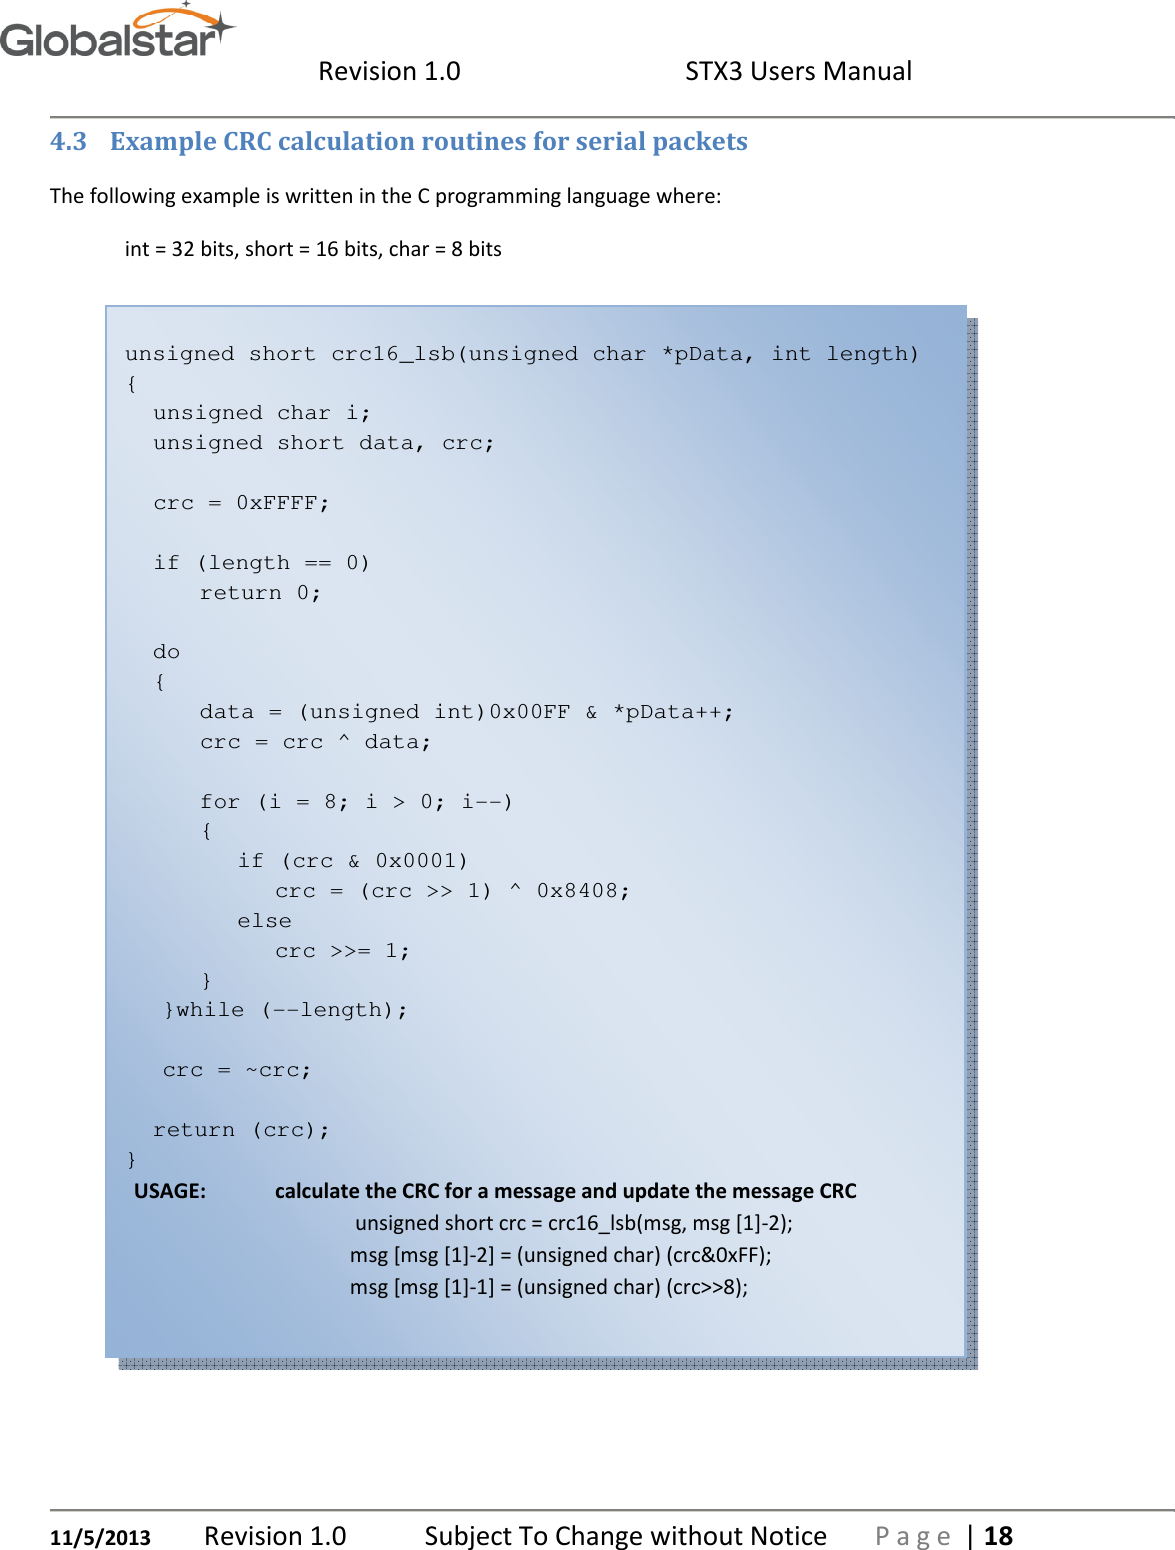  Revision 1.0  STX3 Users Manual   11/5/2013 Revision 1.0   Subject To Change without Notice  P a g e  | 18 4.3 Example CRC calculation routines for serial packets The following example is written in the C programming language where: int = 32 bits, short = 16 bits, char = 8 bits  unsigned short crc16_lsb(unsigned char *pData, int length) { unsigned char i; unsigned short data, crc;  crc = 0xFFFF;  if (length == 0)       return 0;  do {       data = (unsigned int)0x00FF &amp; *pData++;       crc = crc ^ data;        for (i = 8; i &gt; 0; i--)       {         if (crc &amp; 0x0001)           crc = (crc &gt;&gt; 1) ^ 0x8408;         else           crc &gt;&gt;= 1;       }     }while (--length);      crc = ~crc;  return (crc); } USAGE:  calculate the CRC for a message and update the message CRC  unsigned short crc = crc16_lsb(msg, msg [1]-2); msg [msg [1]-2] = (unsigned char) (crc&amp;0xFF); msg [msg [1]-1] = (unsigned char) (crc&gt;&gt;8);   